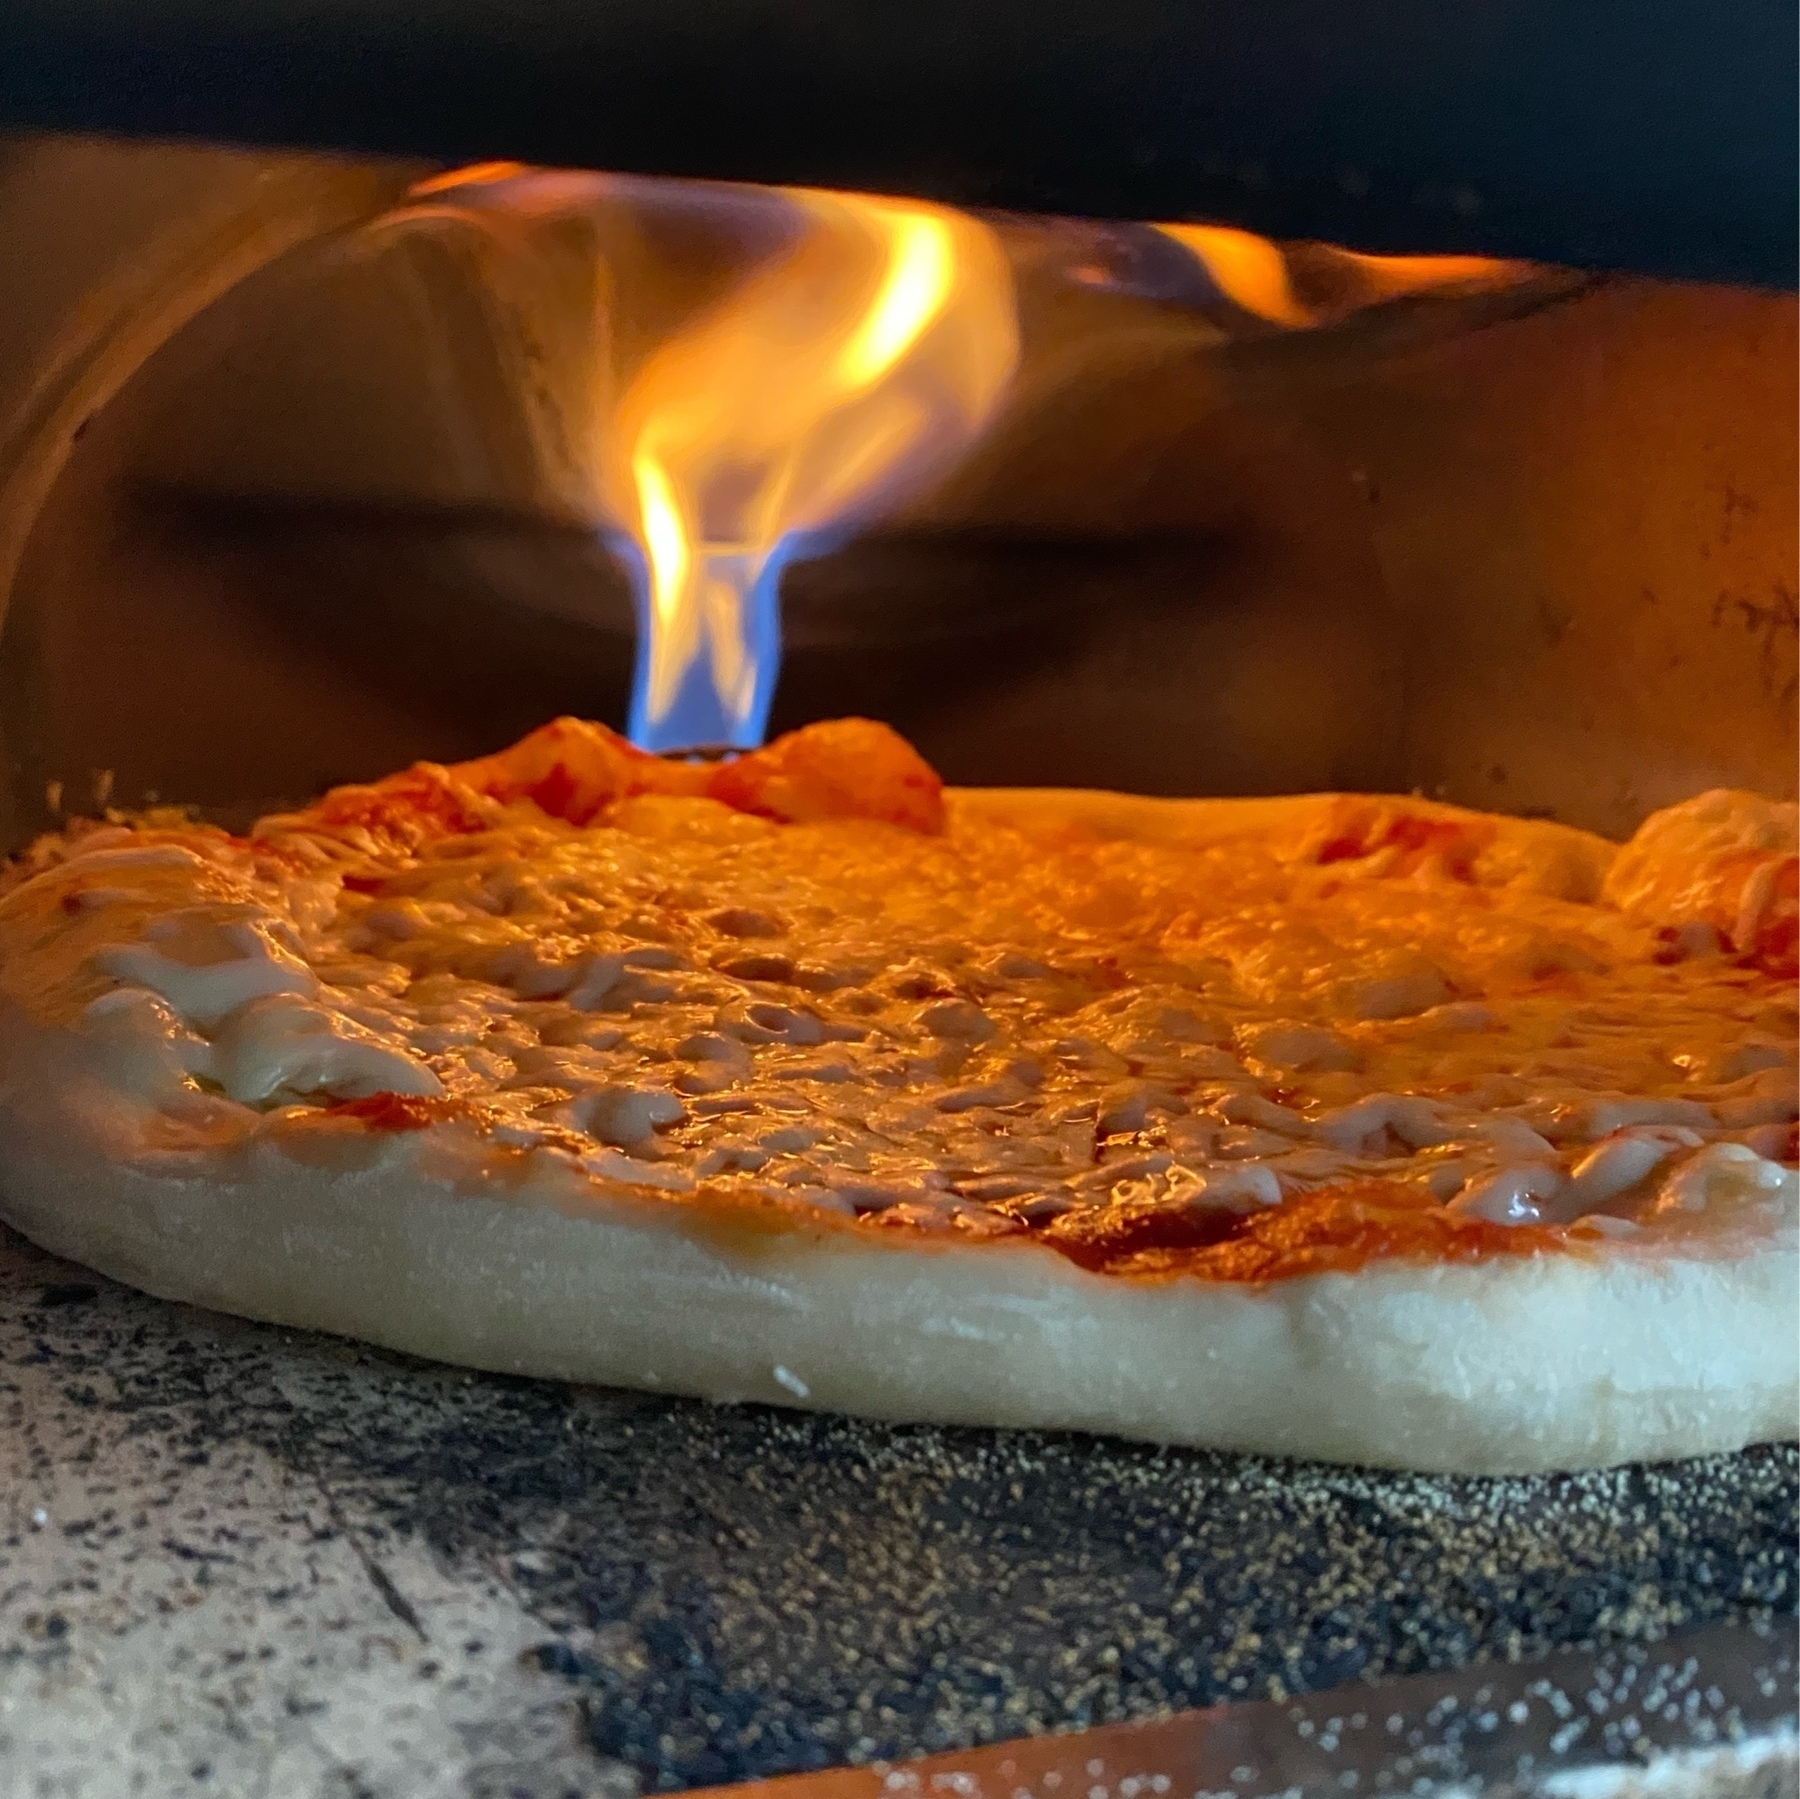 picture of a pizza baking in an oven with prominent flame